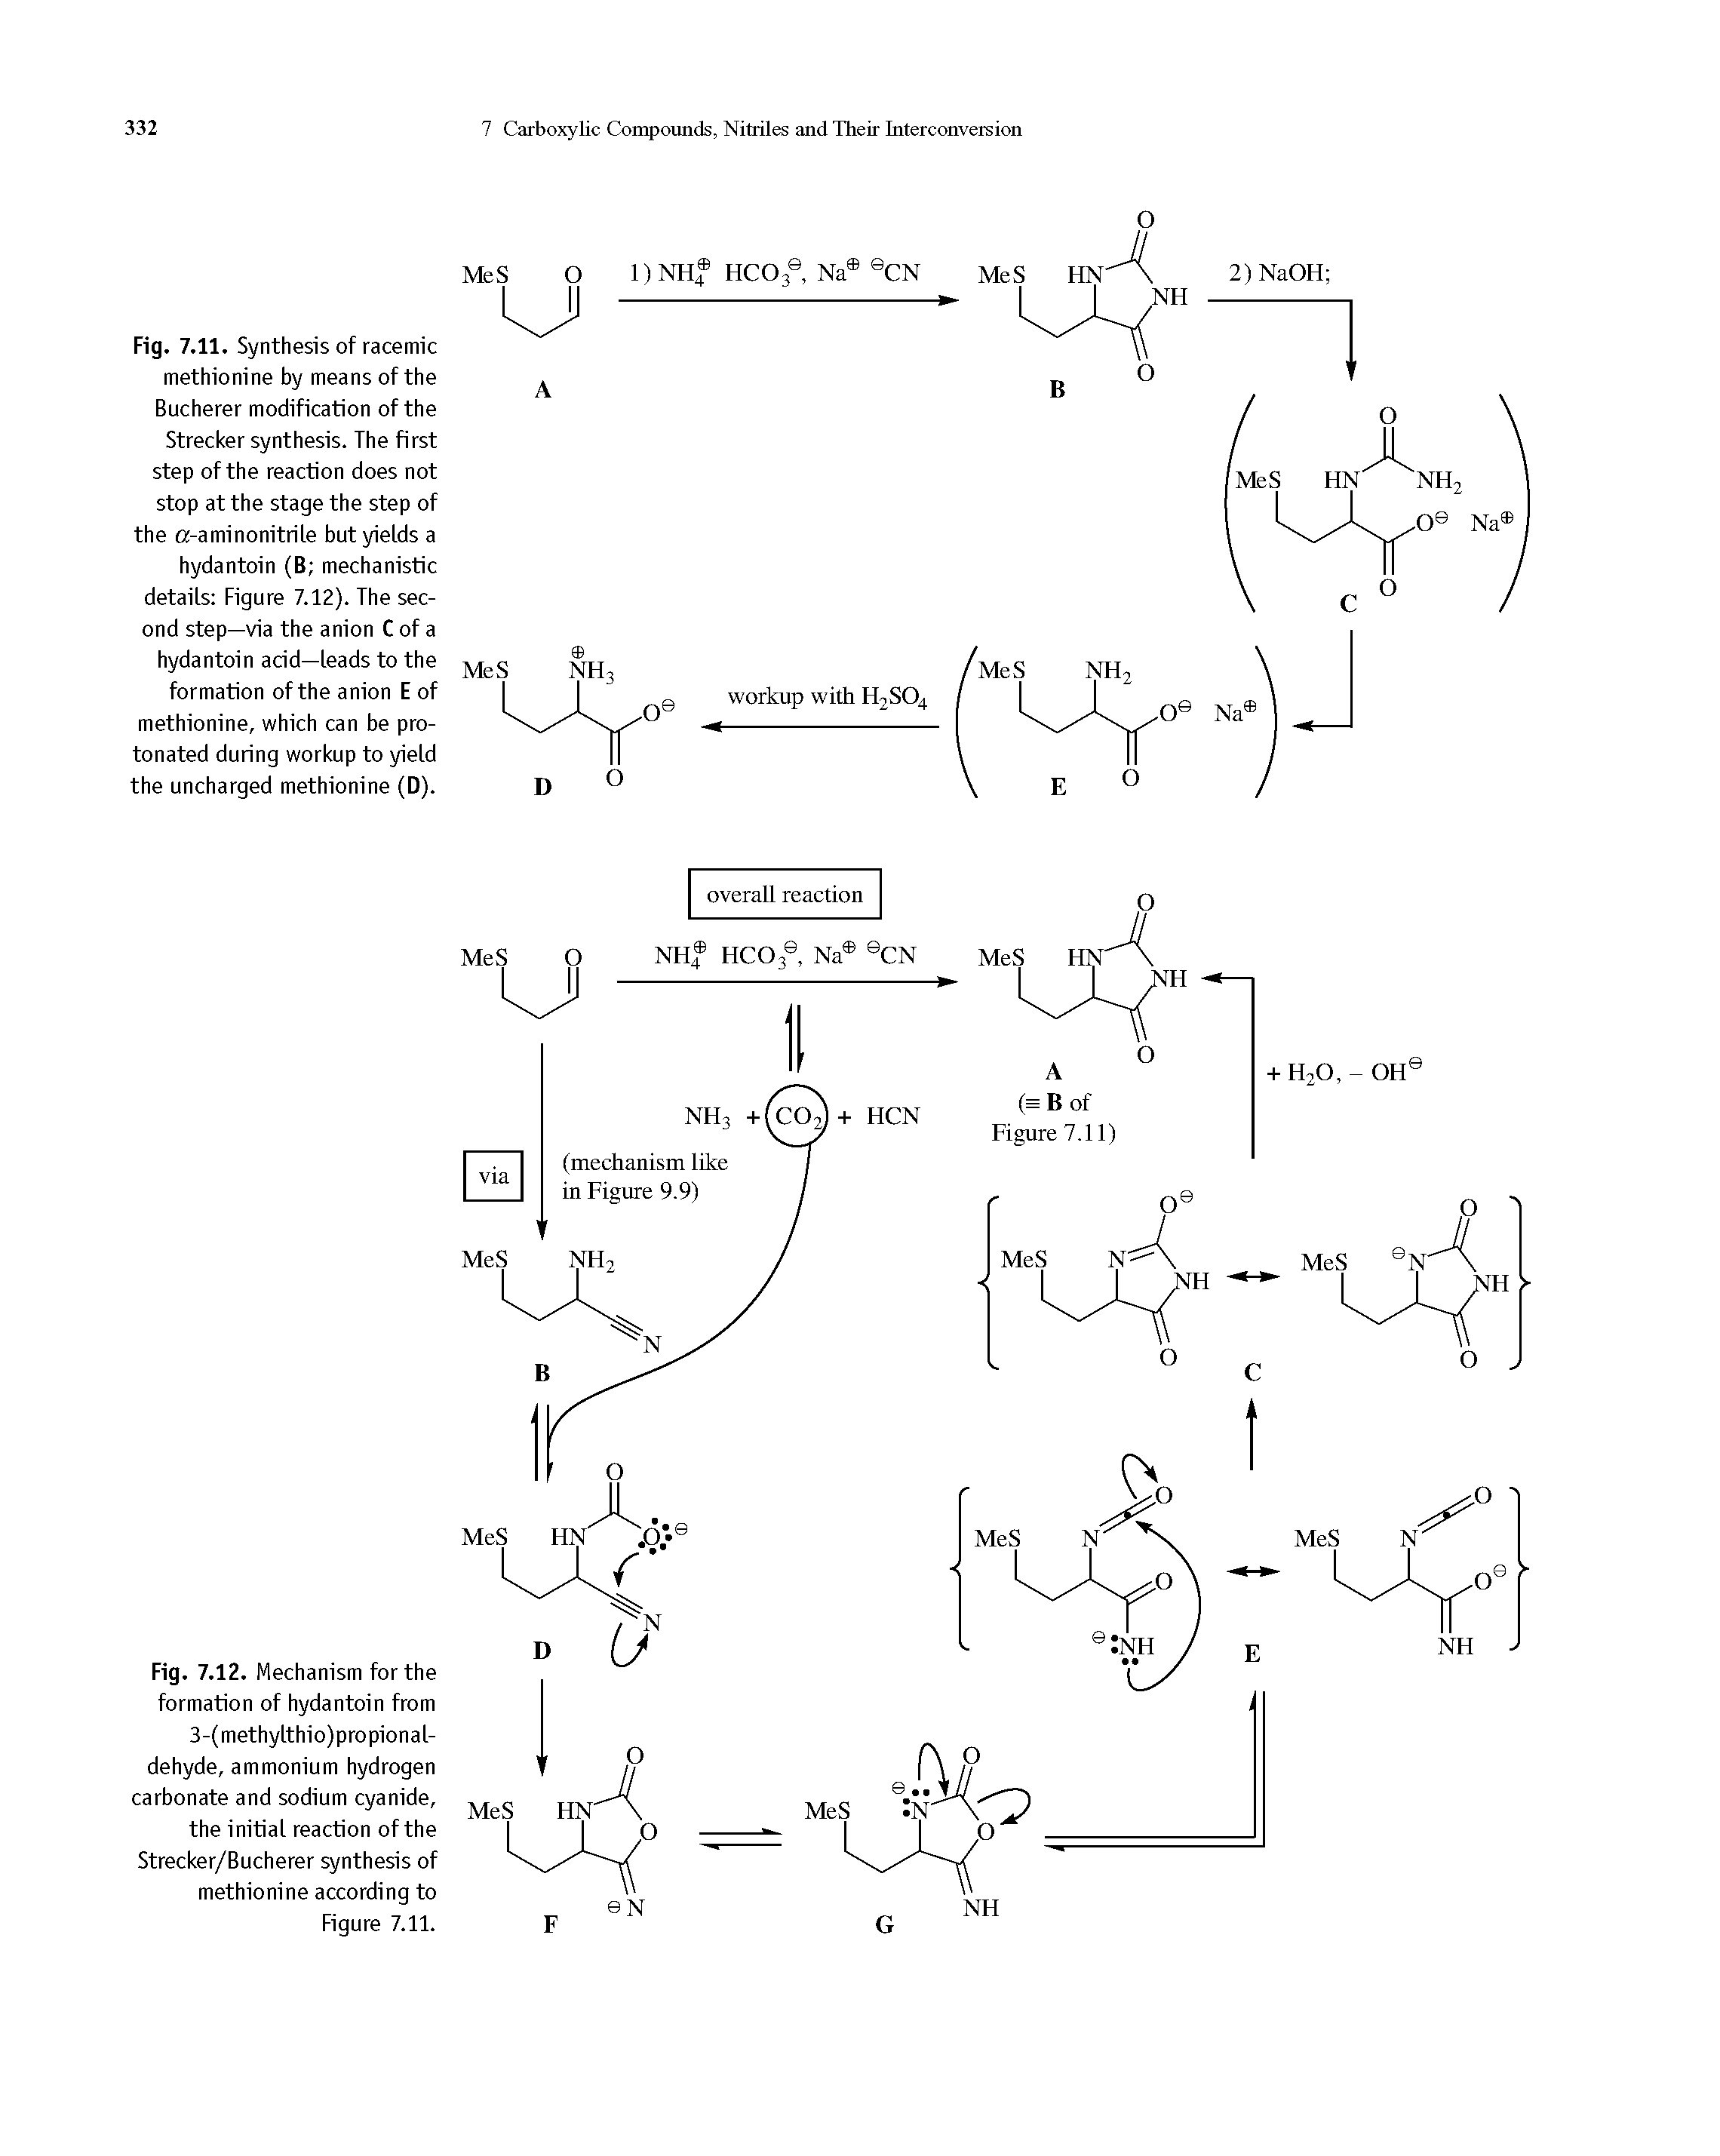 Fig. 7.12. Mechanism for the formation of hydantoin from 3-(methylthio)propional-dehyde, ammonium hydrogen carbonate and sodium cyanide, the initial reaction of the Strecker/Bucherer synthesis of methionine according to Figure 7.11.